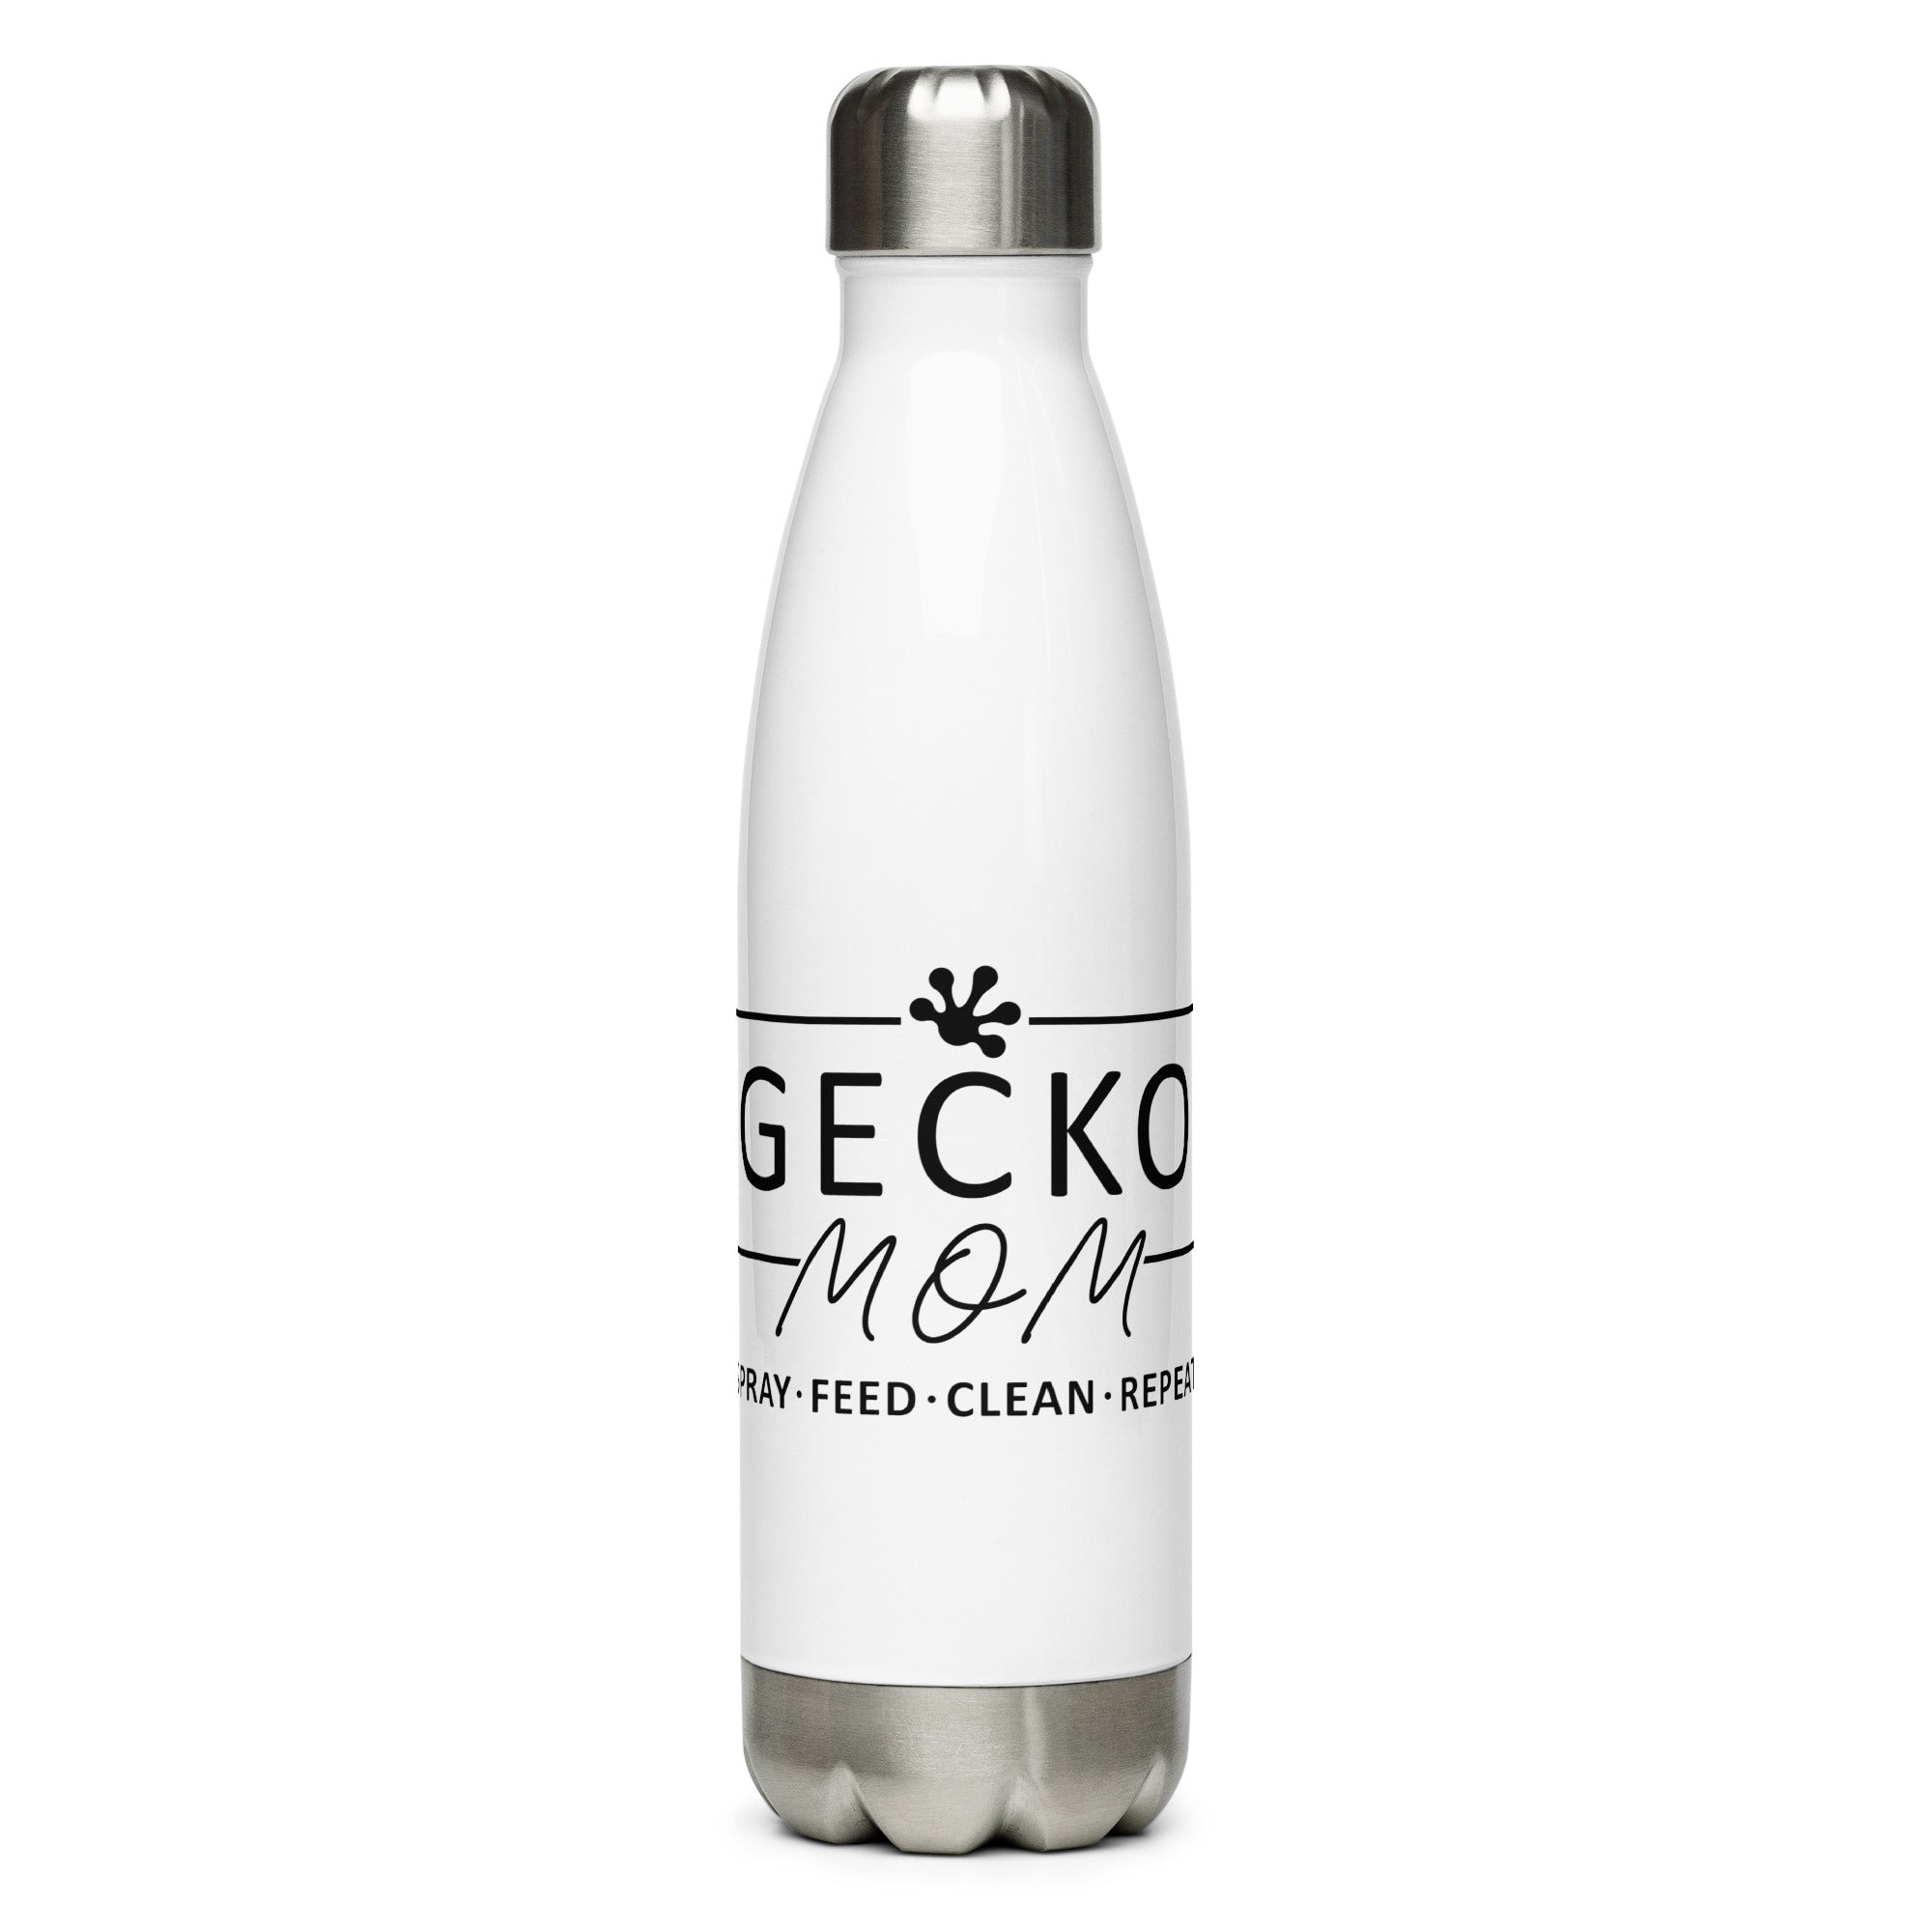 Gecko Mom - Spray, Feed, Clean, Repeat - Water Bottle